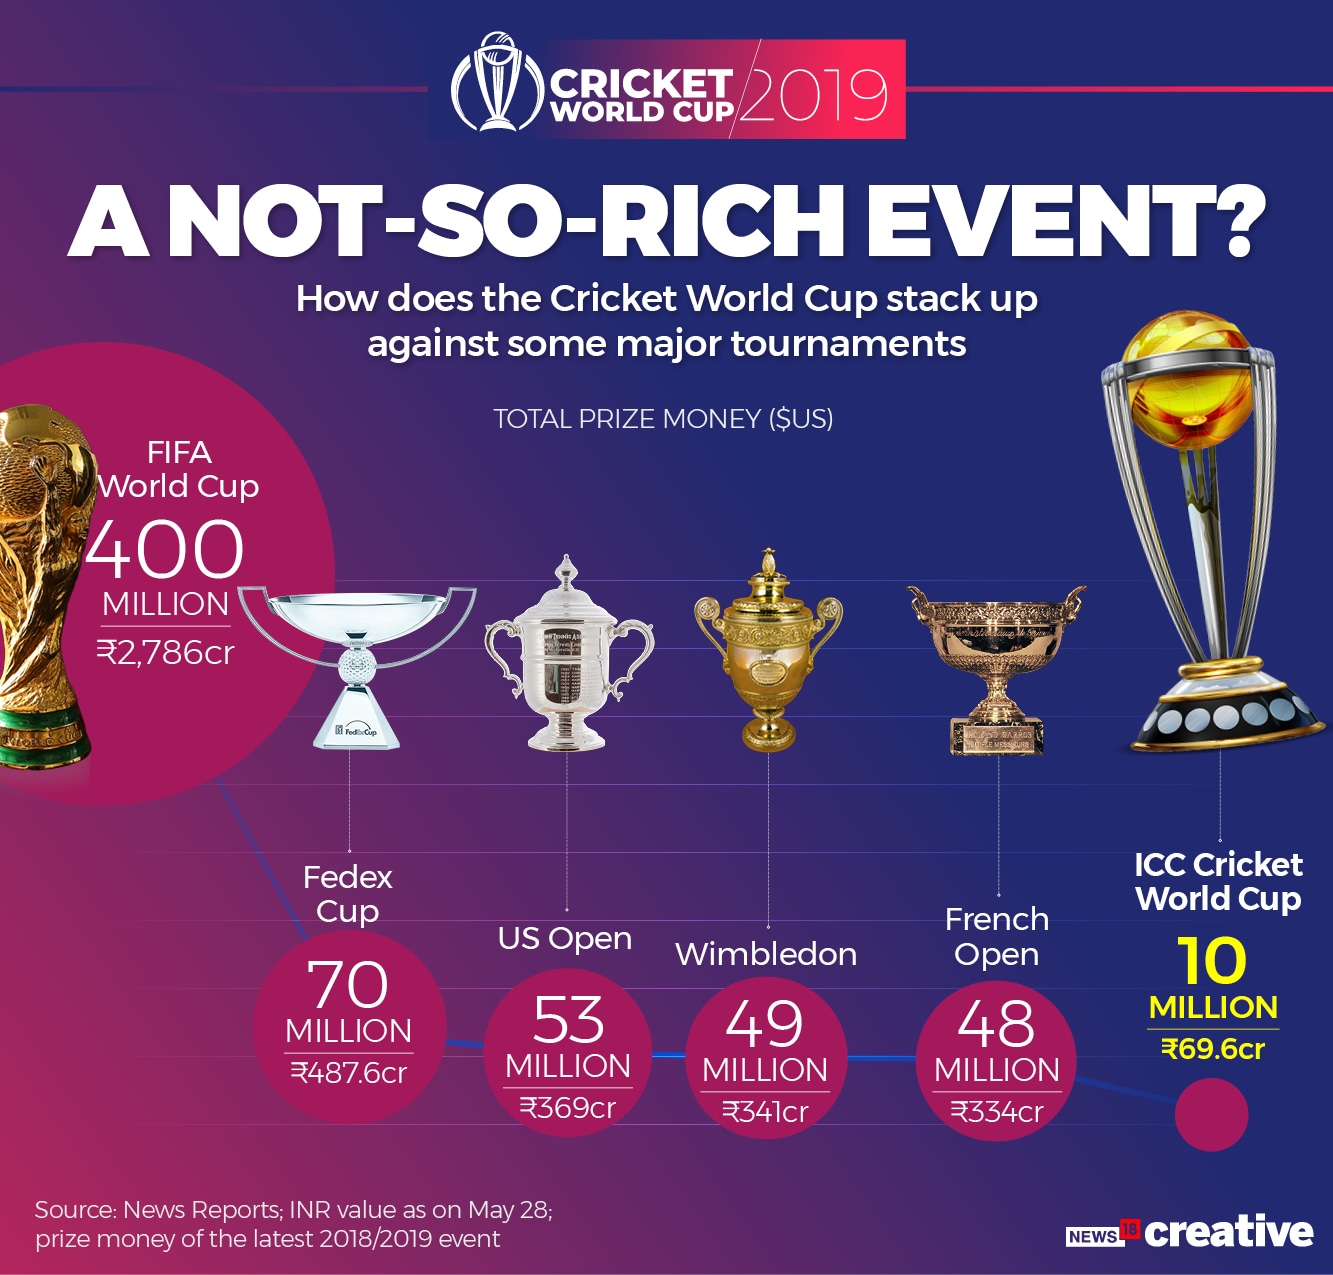 Icc Cricket World Cup Prize Money And How It Compares To Fifa